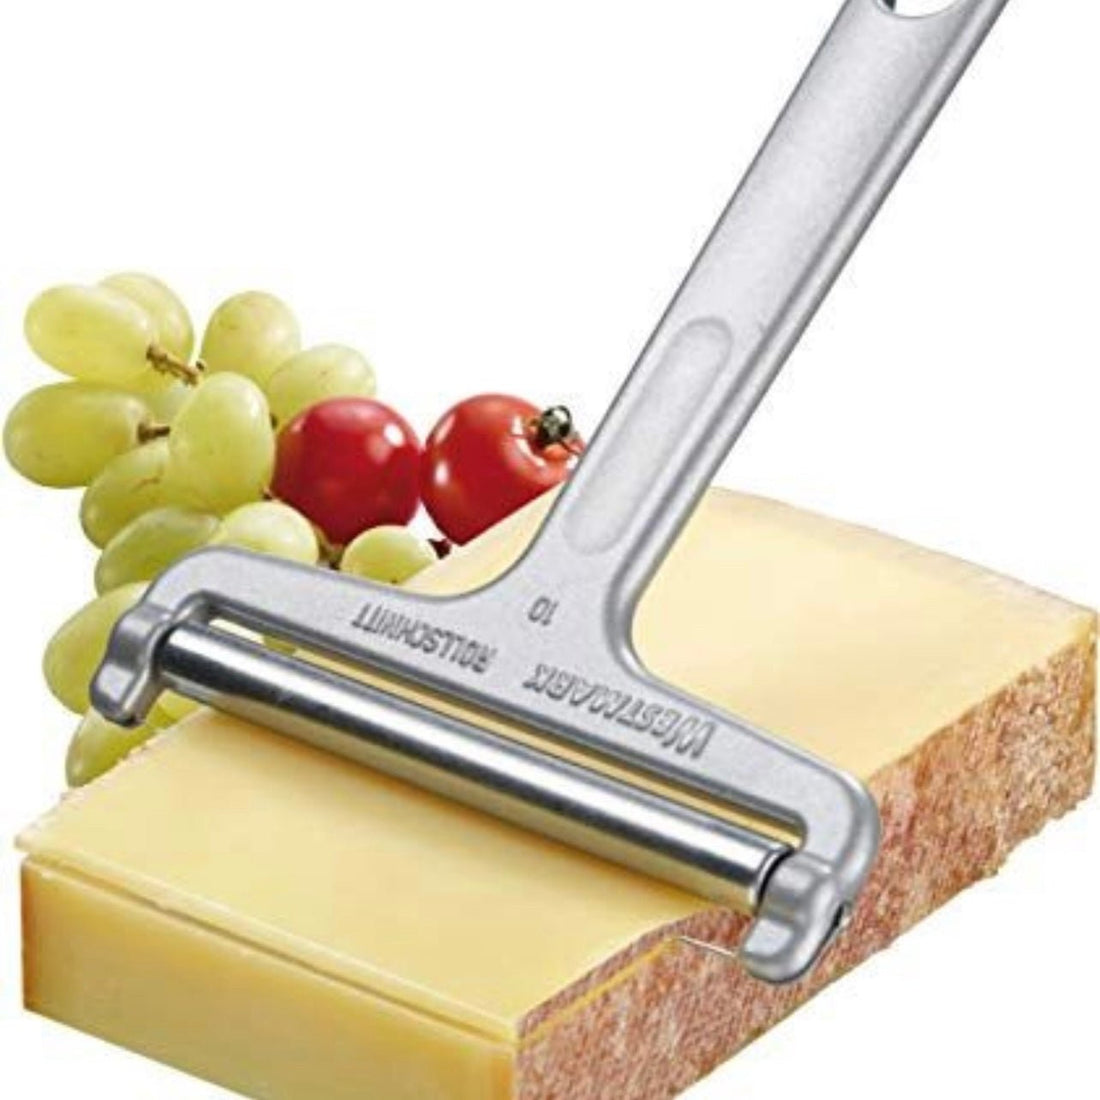 Cheese Slicer - The Flower Crate